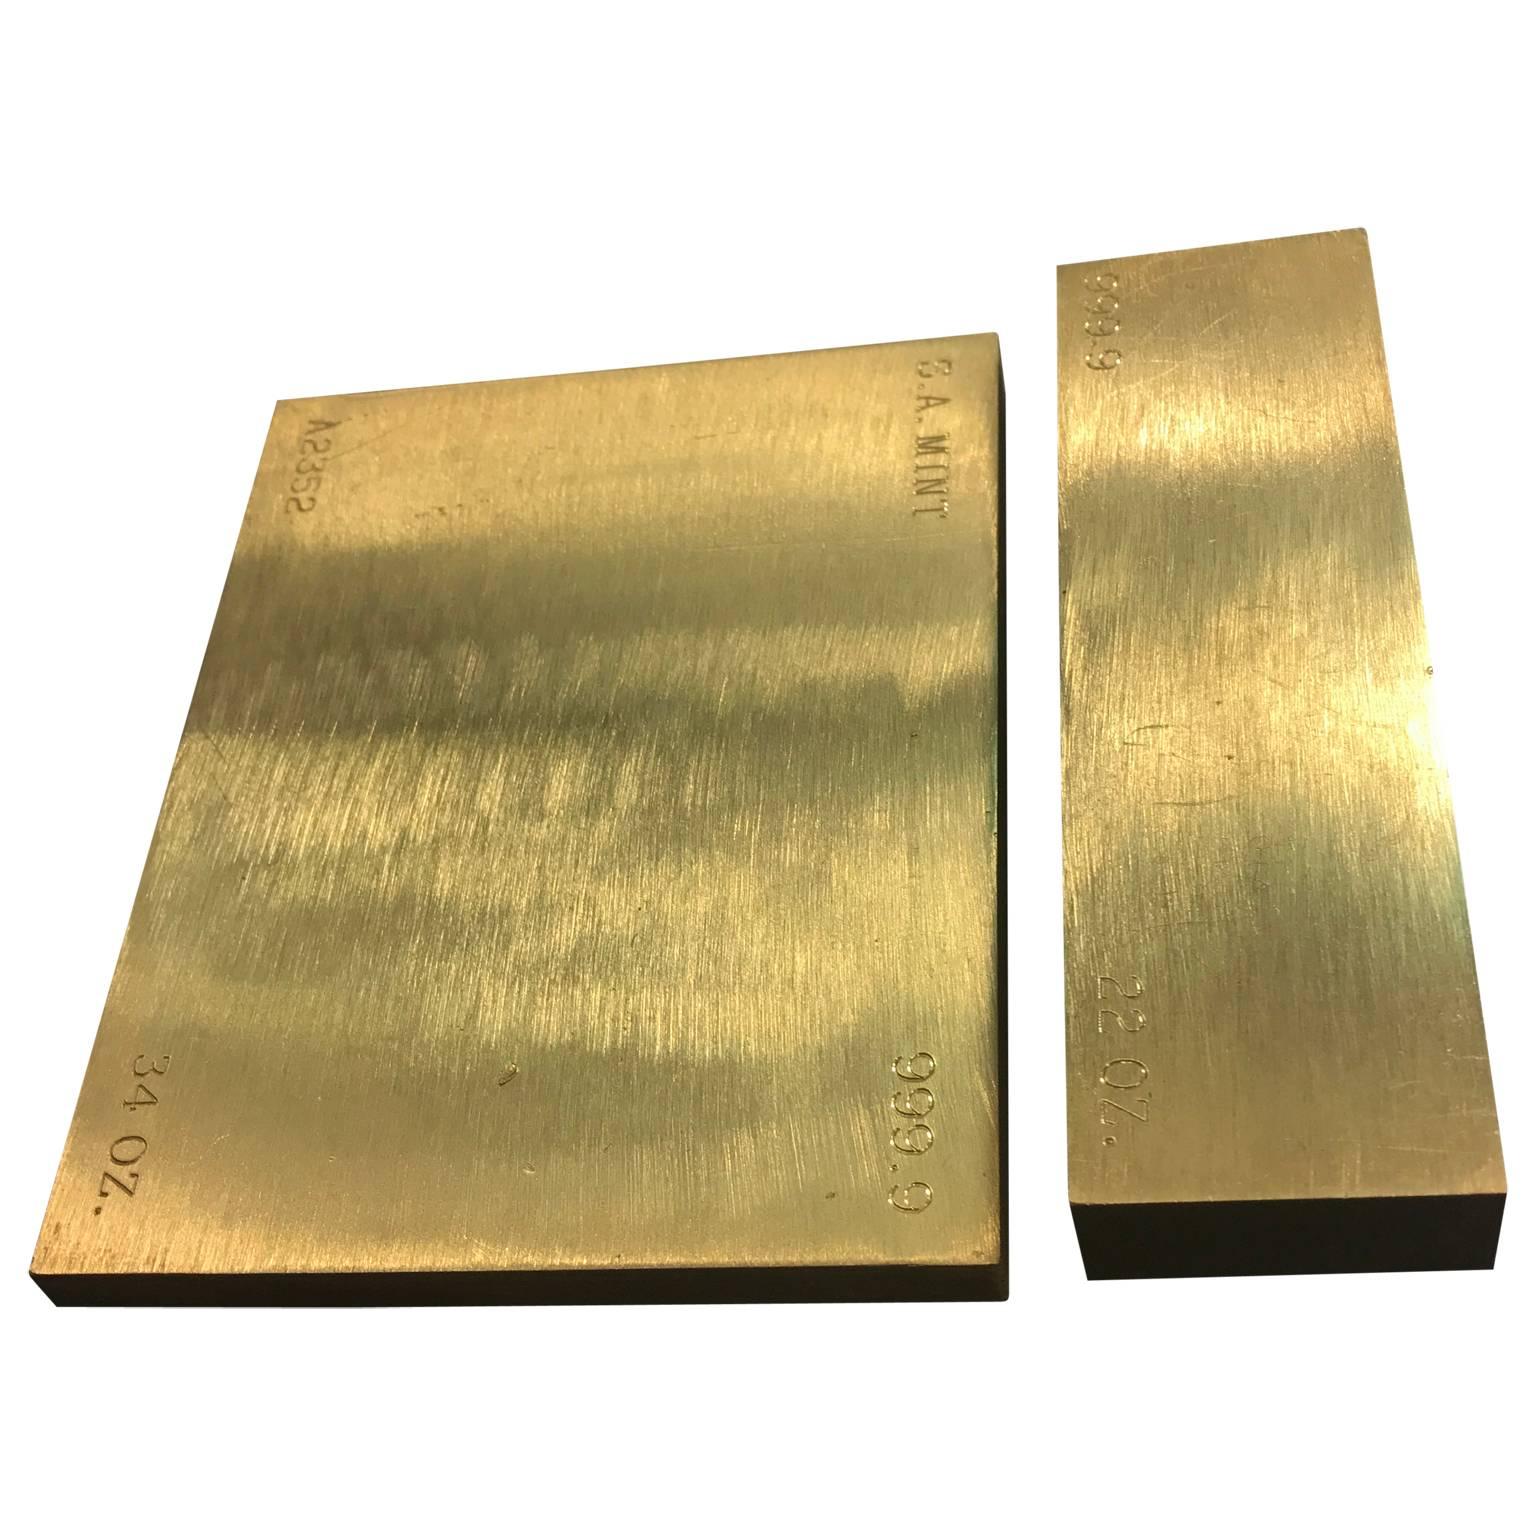 Two brused brass bar with ingravings.